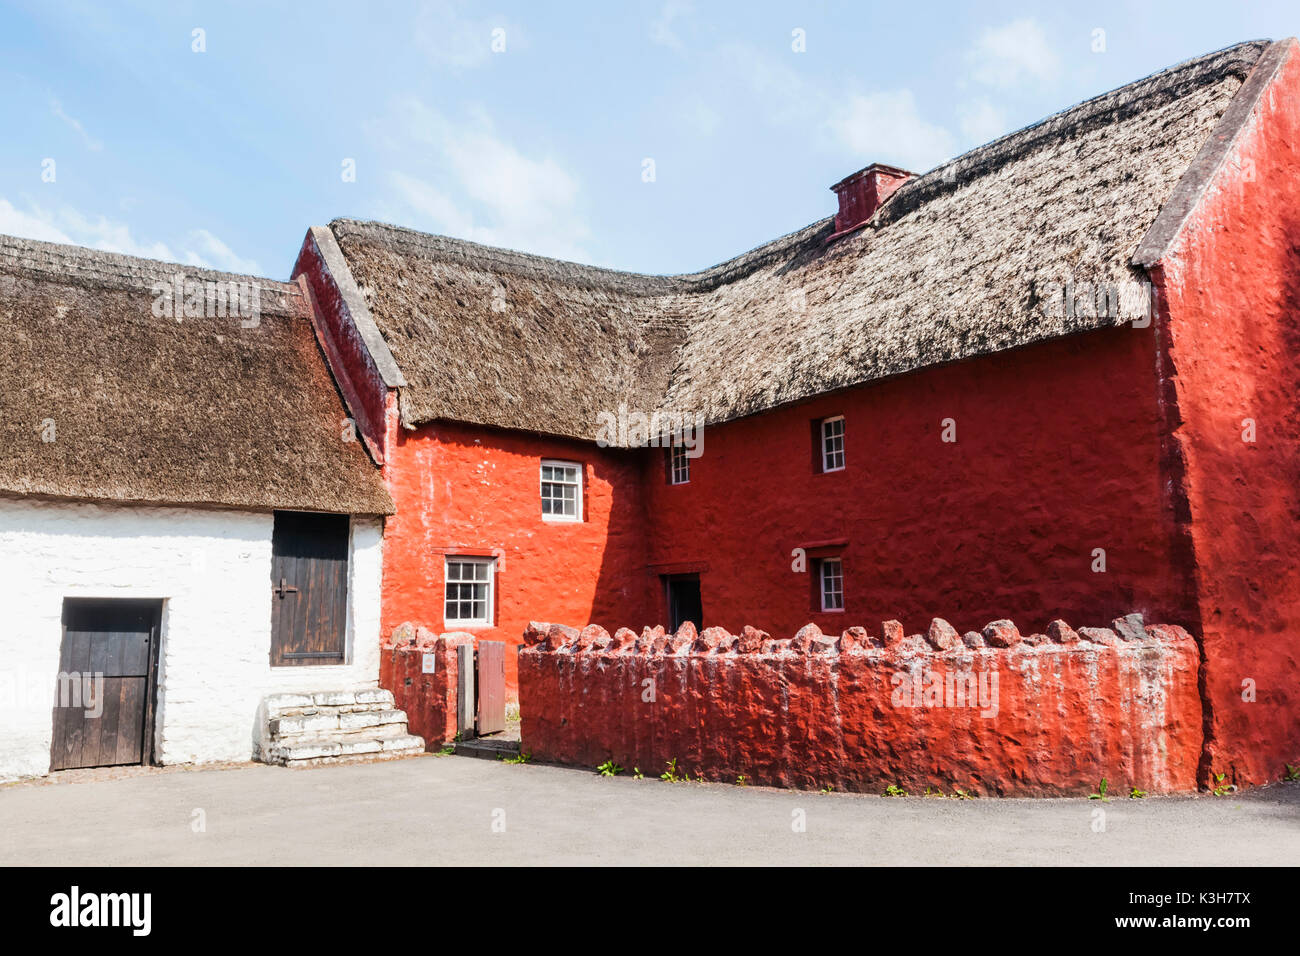 Wales, Cardiff, St Fagan's, Museum of Welsh Life, Historic Village House Stock Photo